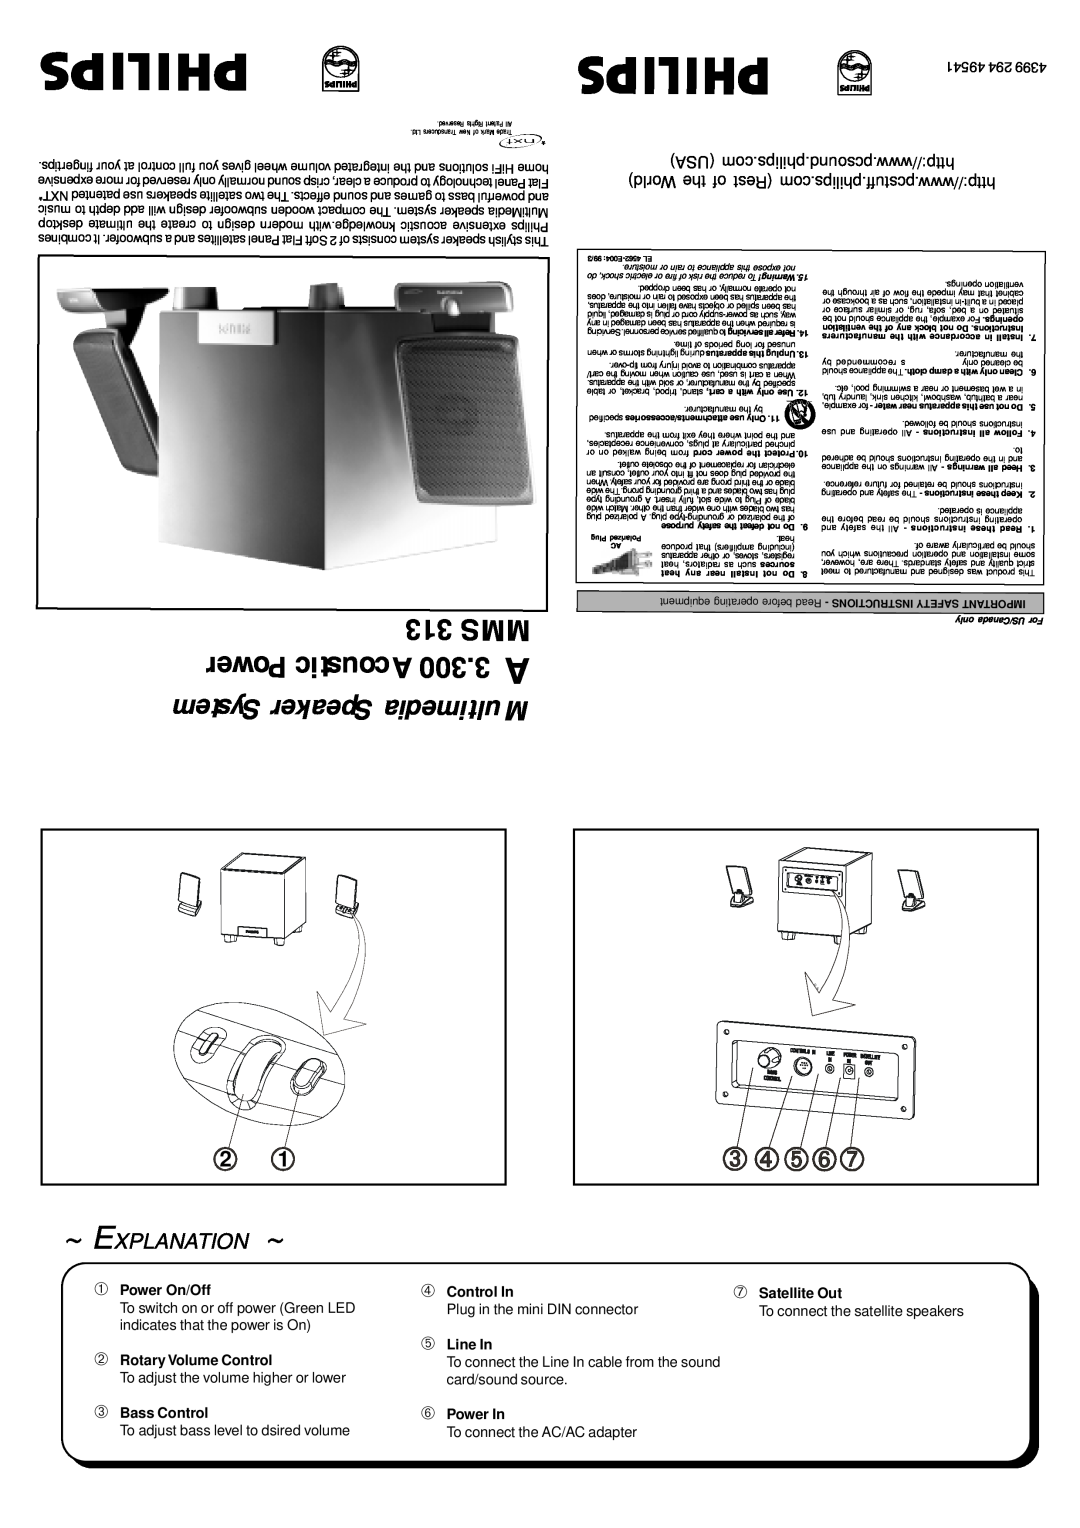 Philips MMS3031799 important safety instructions 313 MMS, Power Acoustic, System Speaker Multimedia, ~ Explanation 